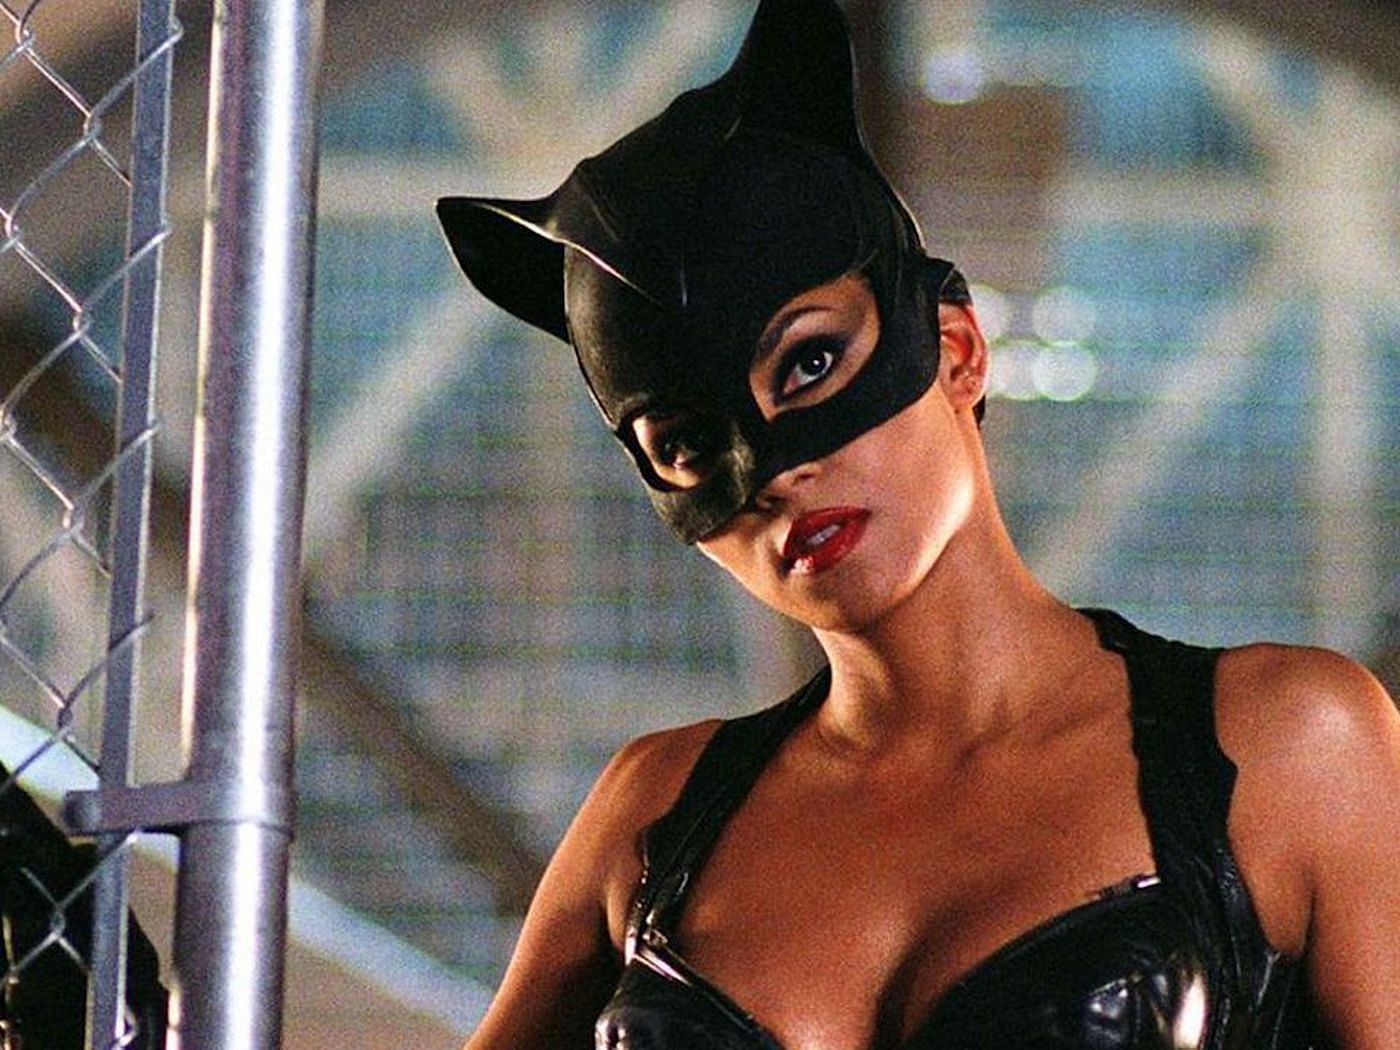 Halle Berry as Catwoman (Image via Warner Bros)